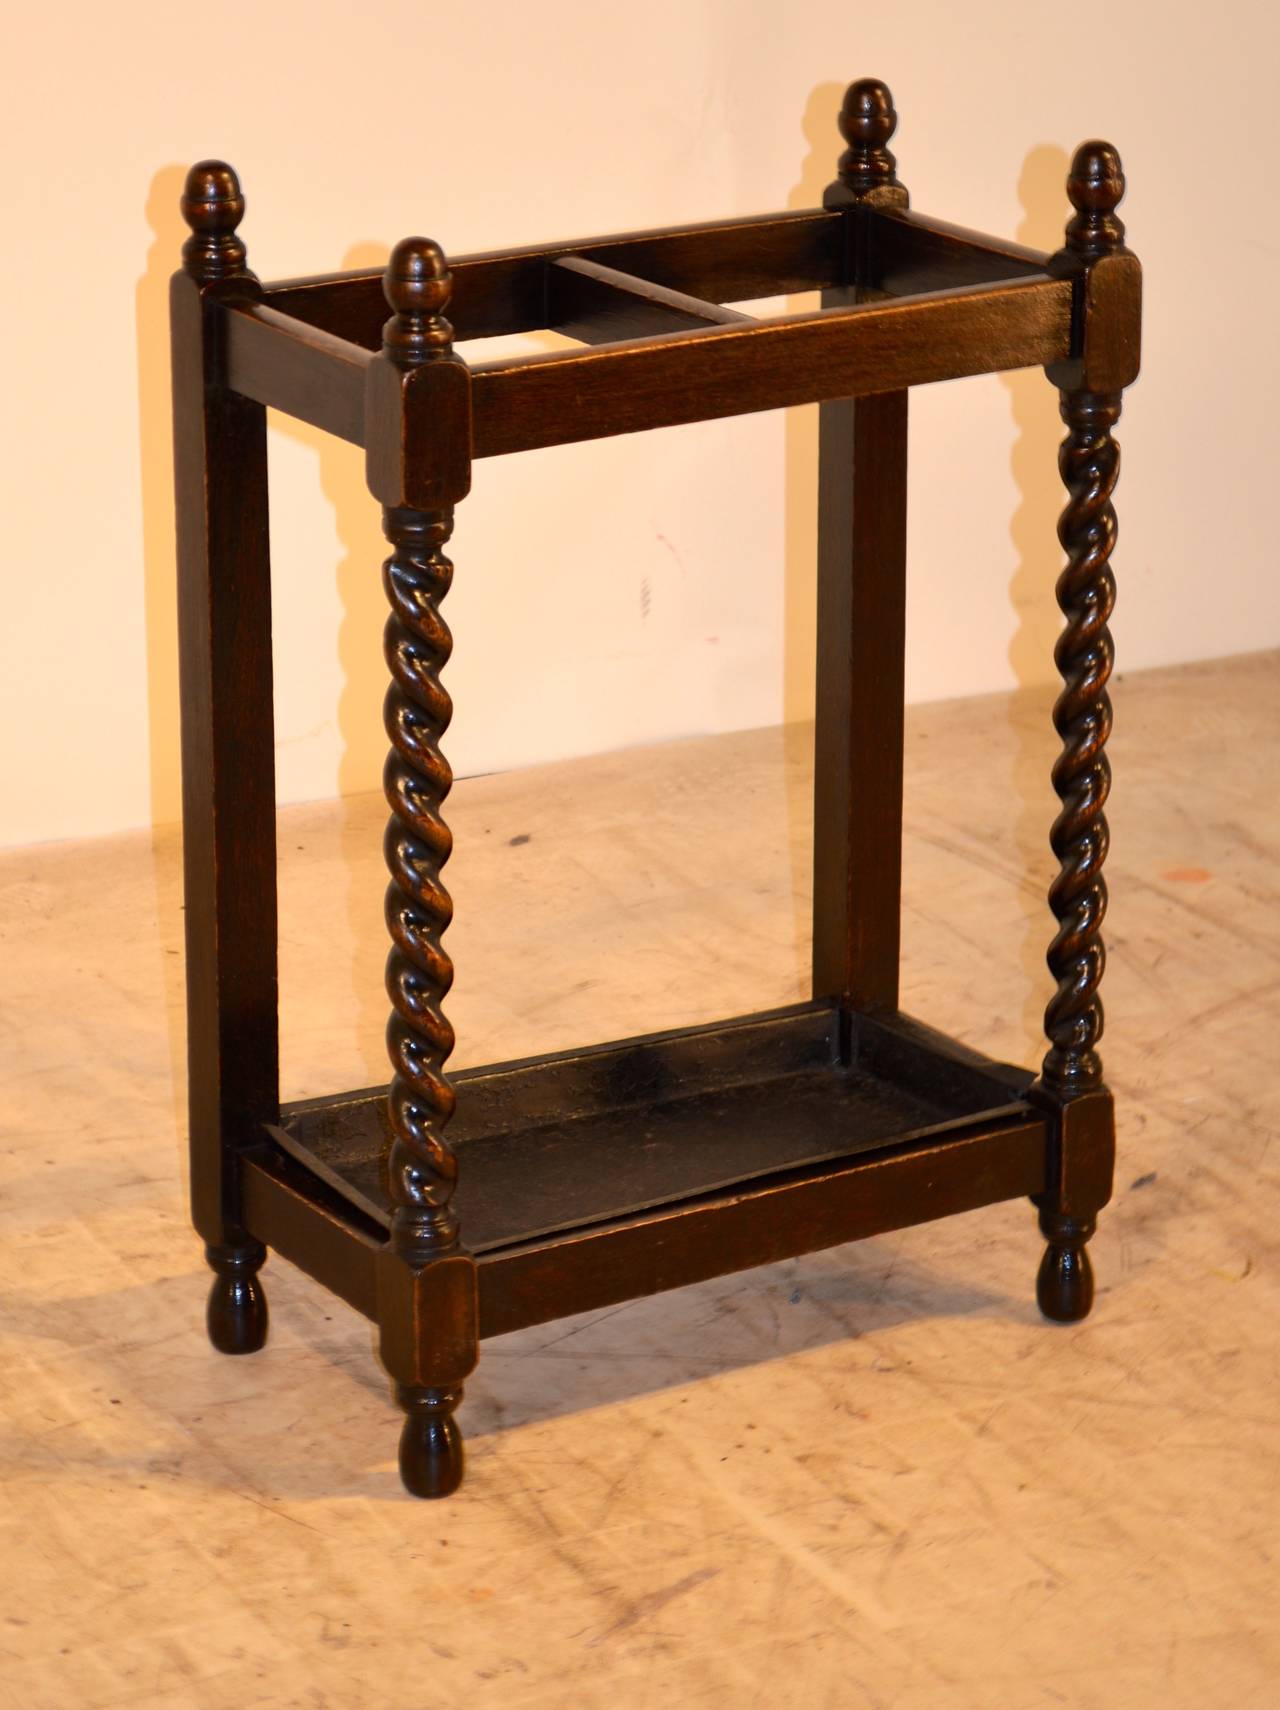 Late 19th century, English oak umbrella stand with lovely hand-turned finials and barley twist front legs and simple back legs. Metal tray shows signs of normal wear. Nicely turned feet.